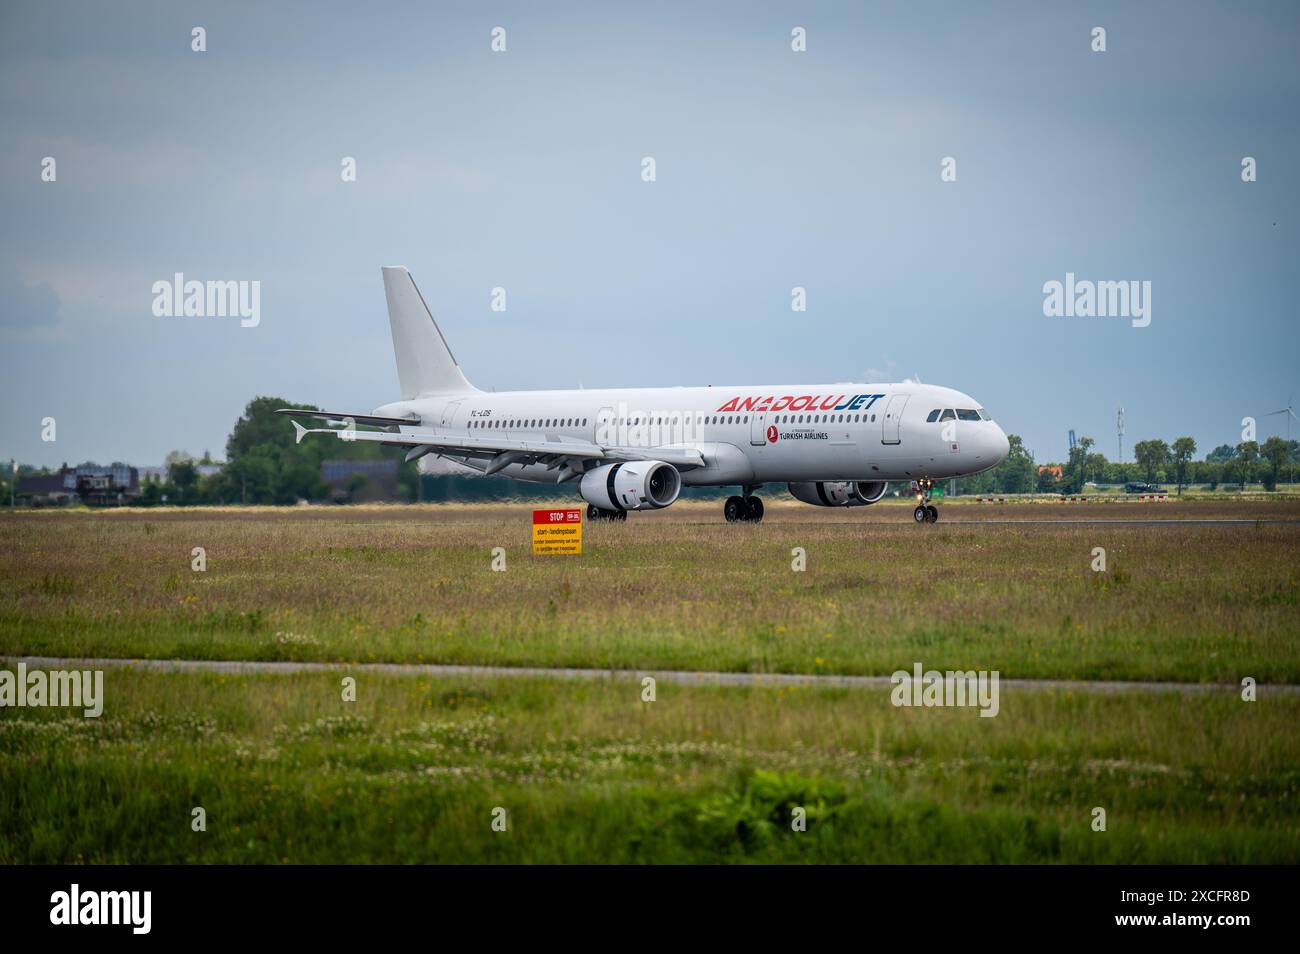 An aircraft of AnadoluJet, a Turkish low-cost airline and also a subsidiary of Turkish Airlines. ANP/Hollandse Hoogte/Josh Walet netherlands out - belgium out Stock Photo